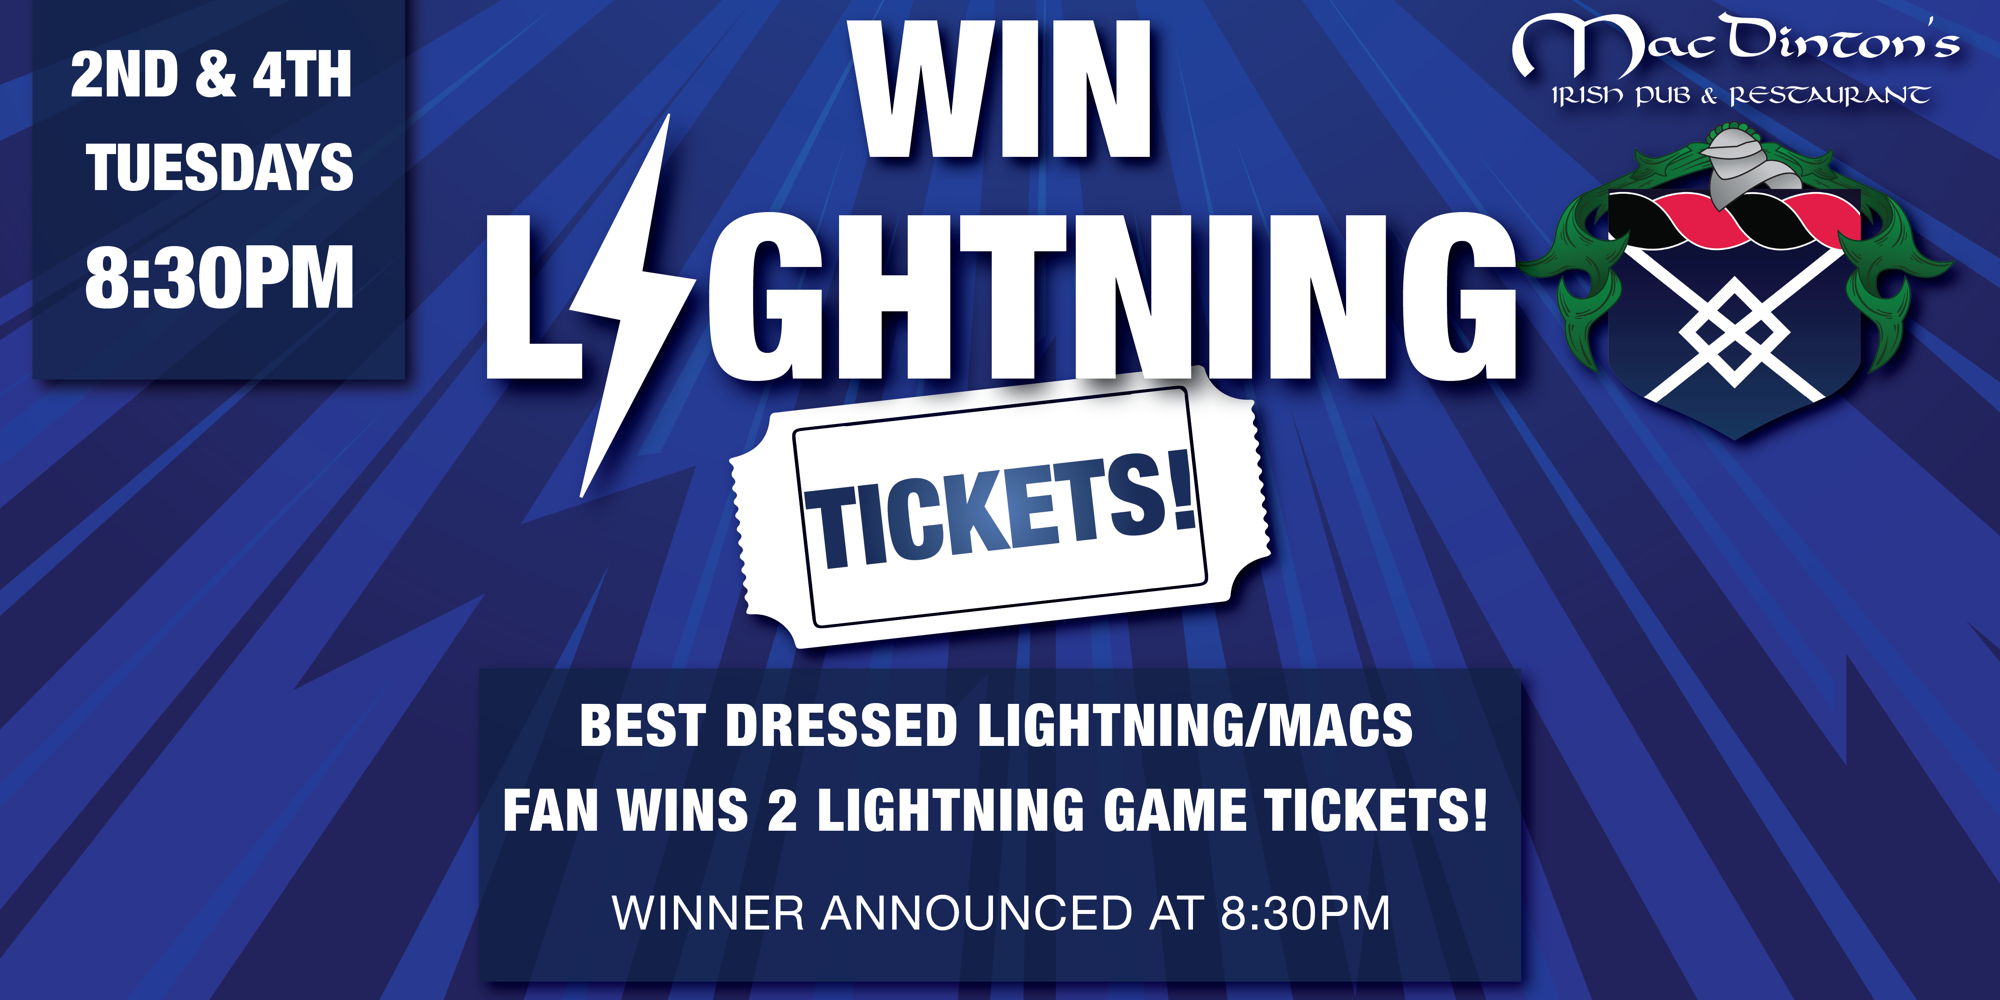 Win Lightning Tickets!  promotional image